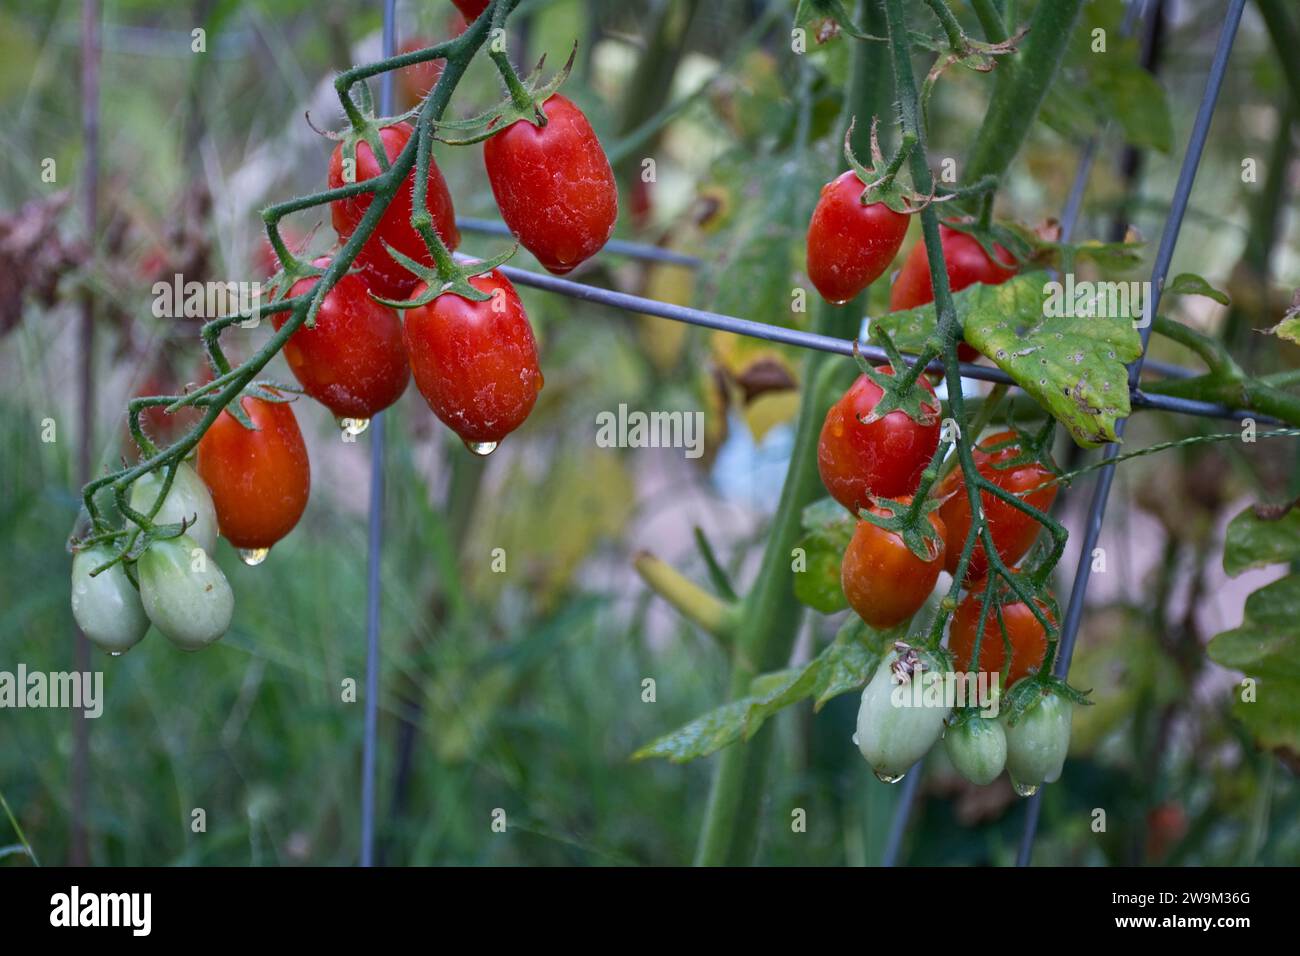 A cherry tomato plant carrying a cluster of ripe and red cherry tomatoes Stock Photo